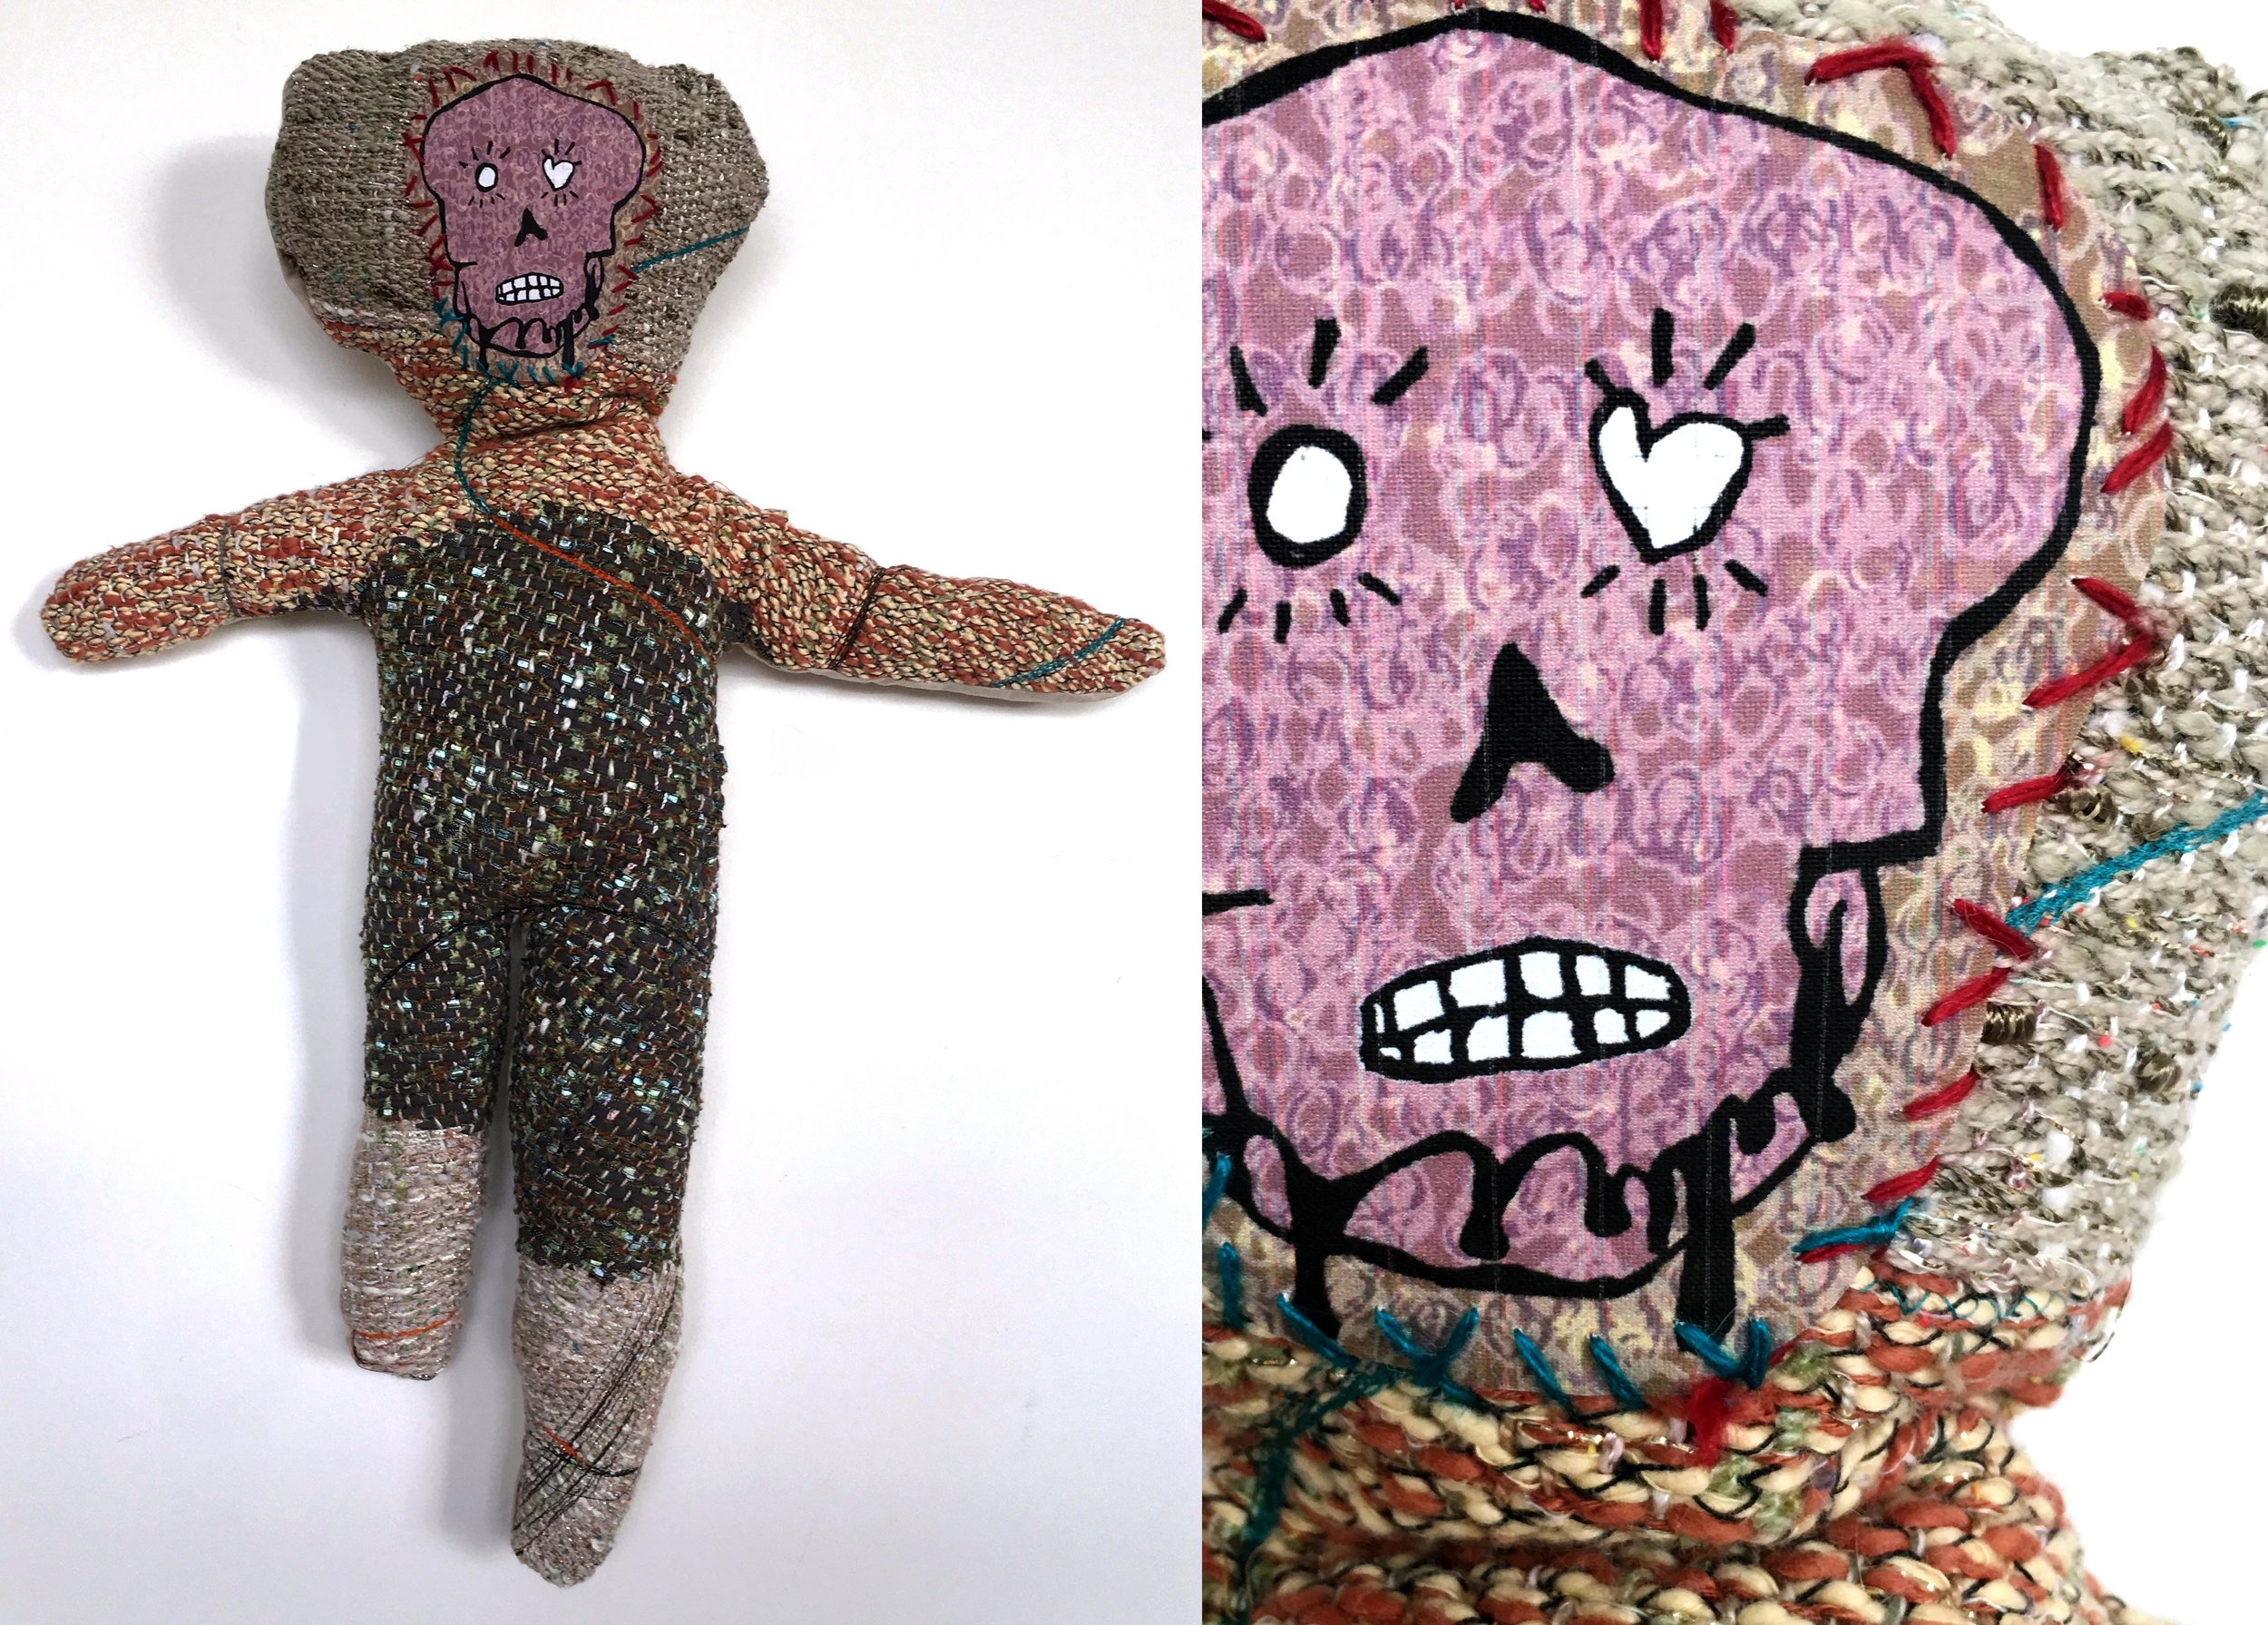   Skeleton Baby  h: 28" x w: 12" hand-woven and machine-made fabric, embroidery, inkjet prints, fleece 2017 